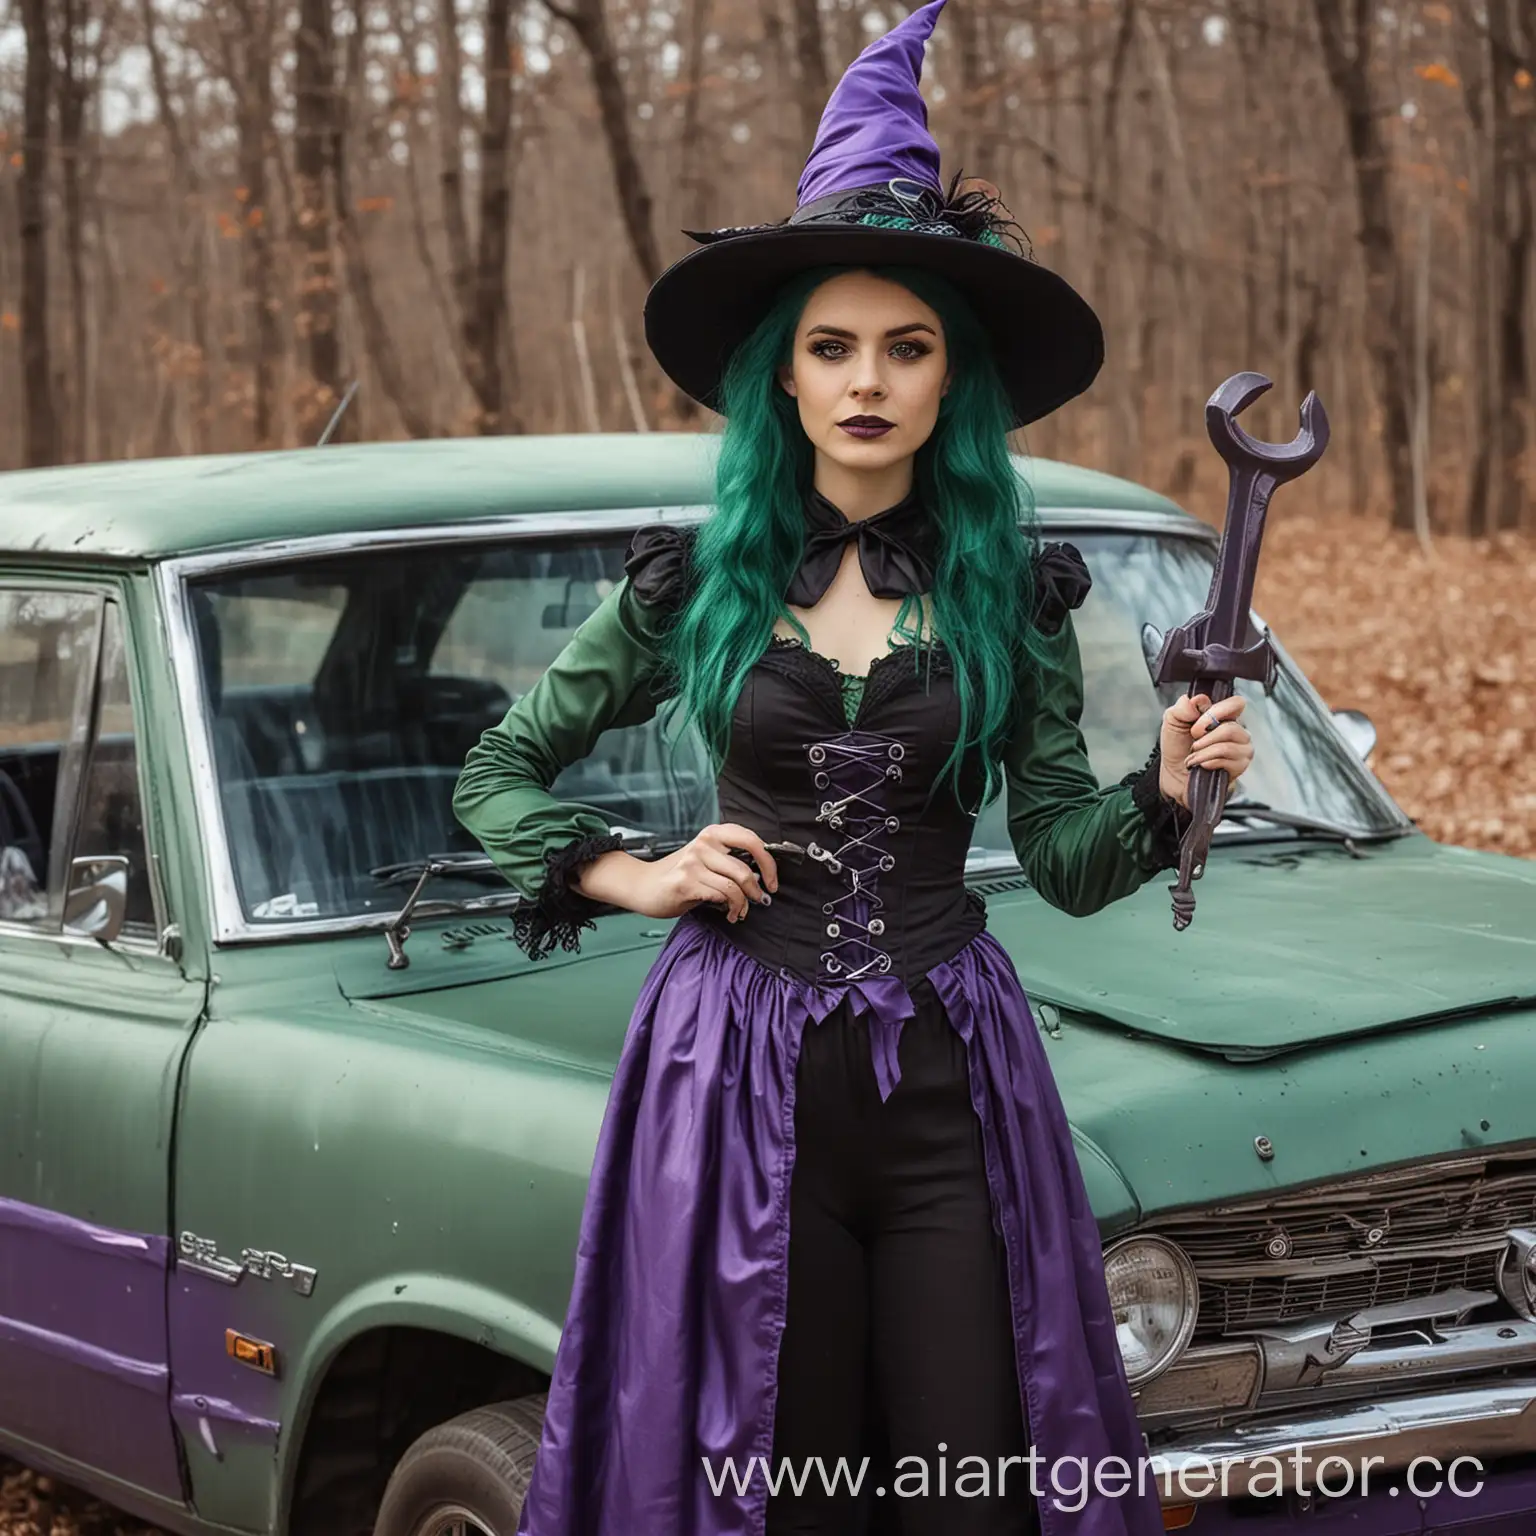 A woman in a green witch costume holding a purple car and a wrench.